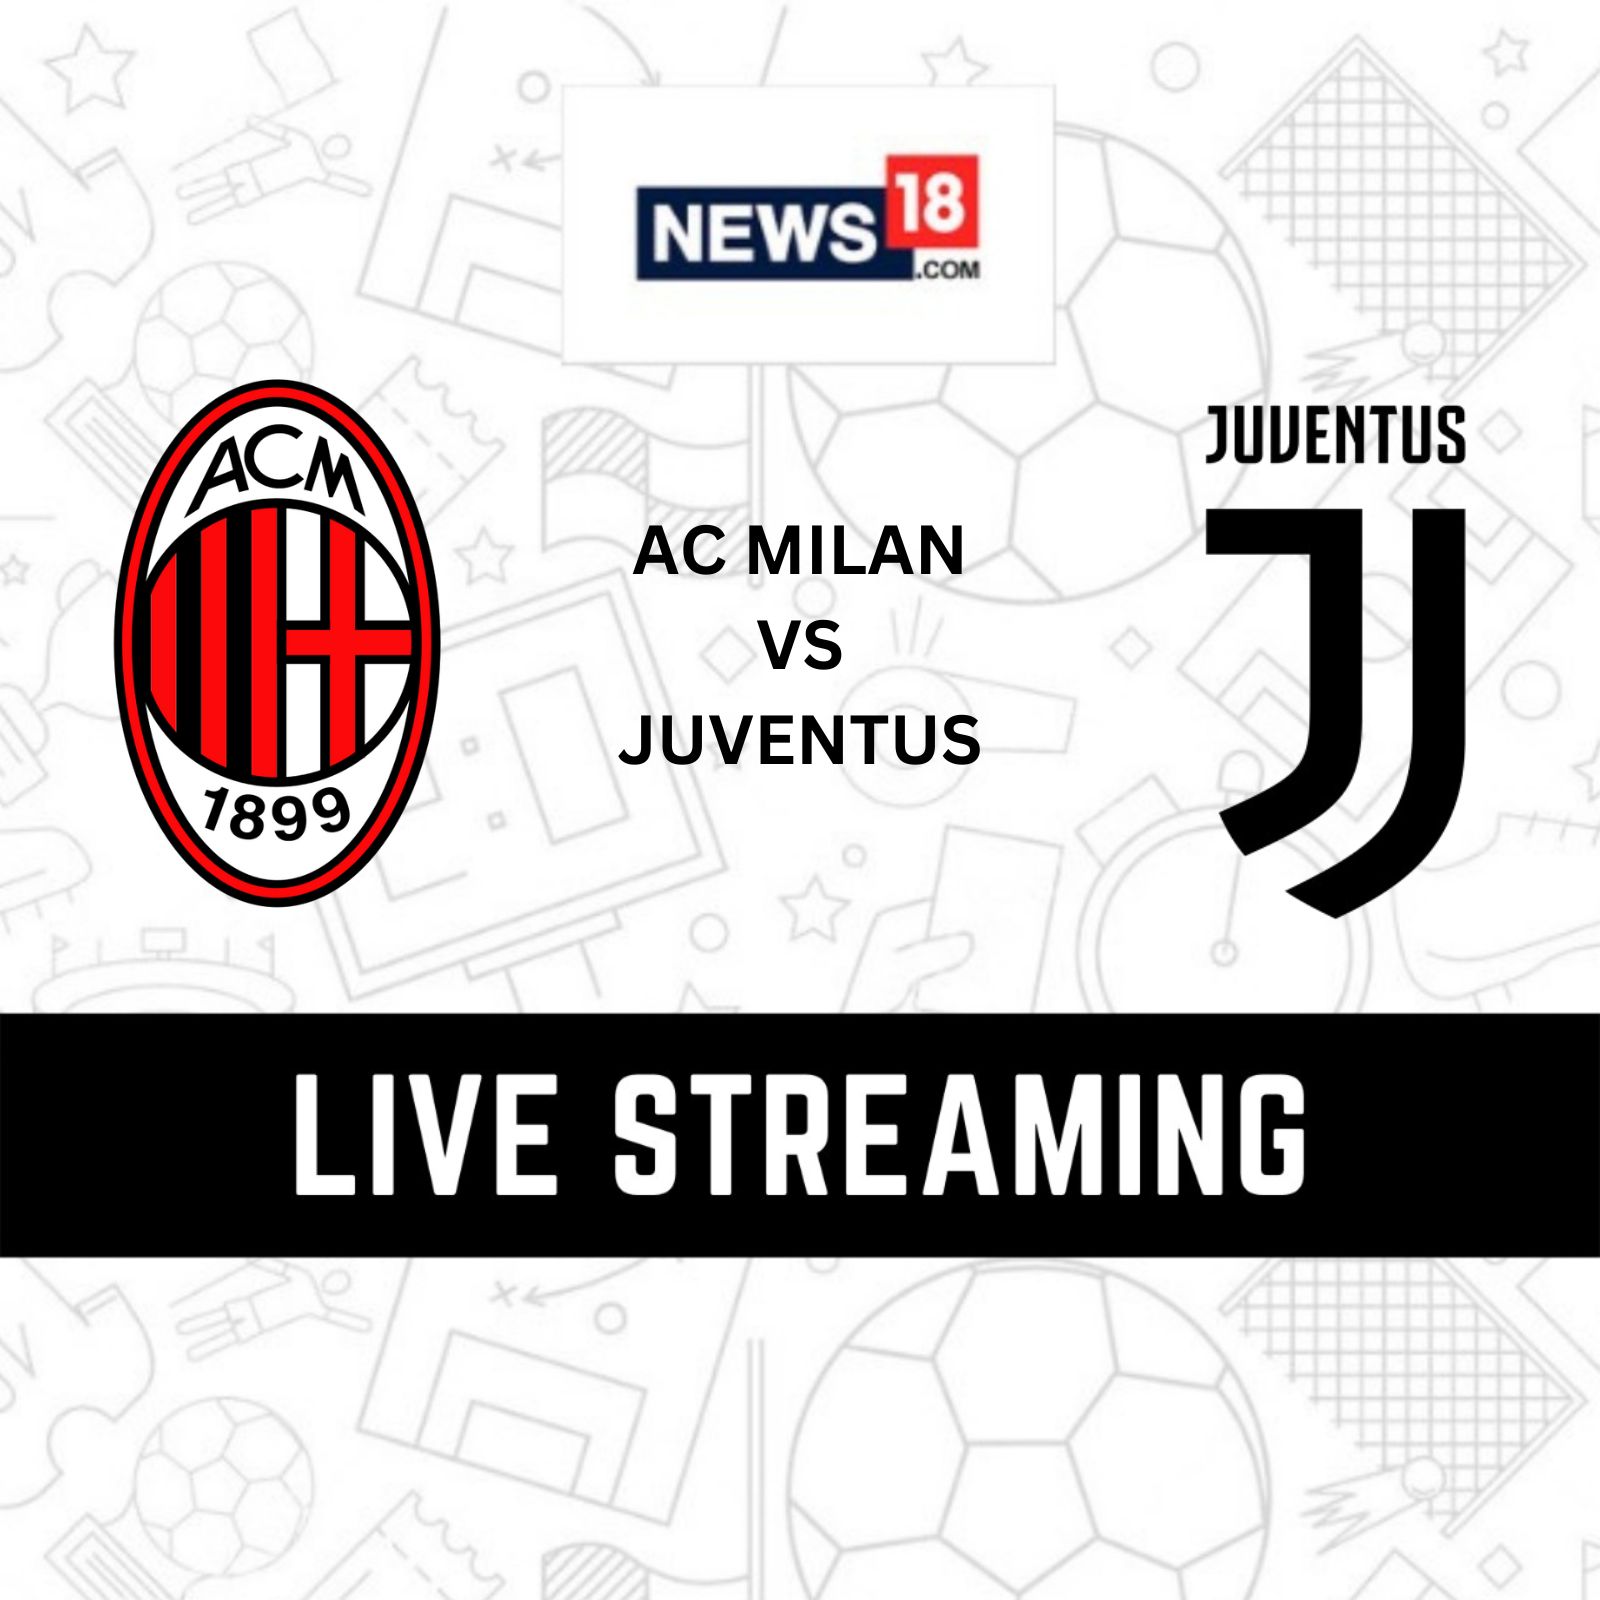 AC Milan vs Juventus Streaming: When and Where to Watch AC Milan vs Juventus Serie A Live Coverage on Live TV Online